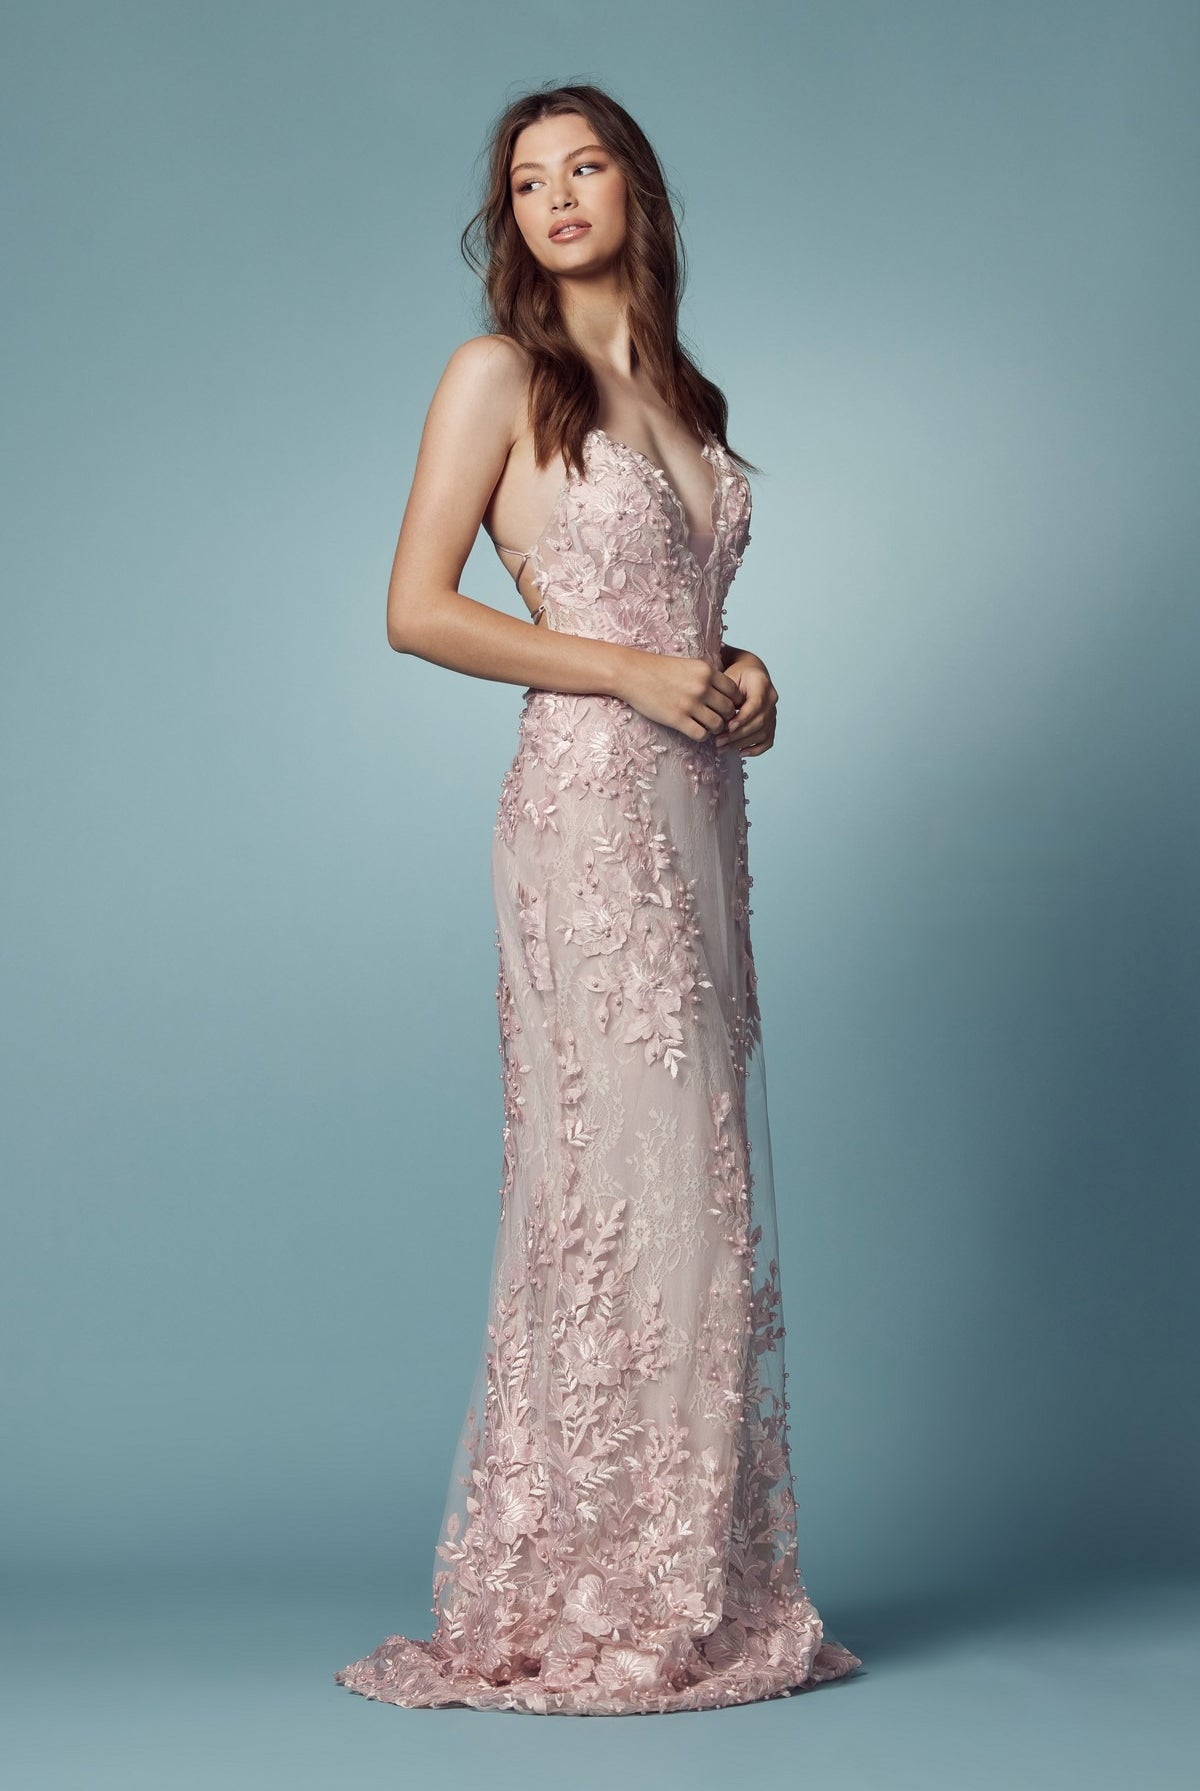 Embroidered Lace Illusion V-Neck Tulle Skirt Long Prom Dress NXF485-All Dresses-smcfashion.com